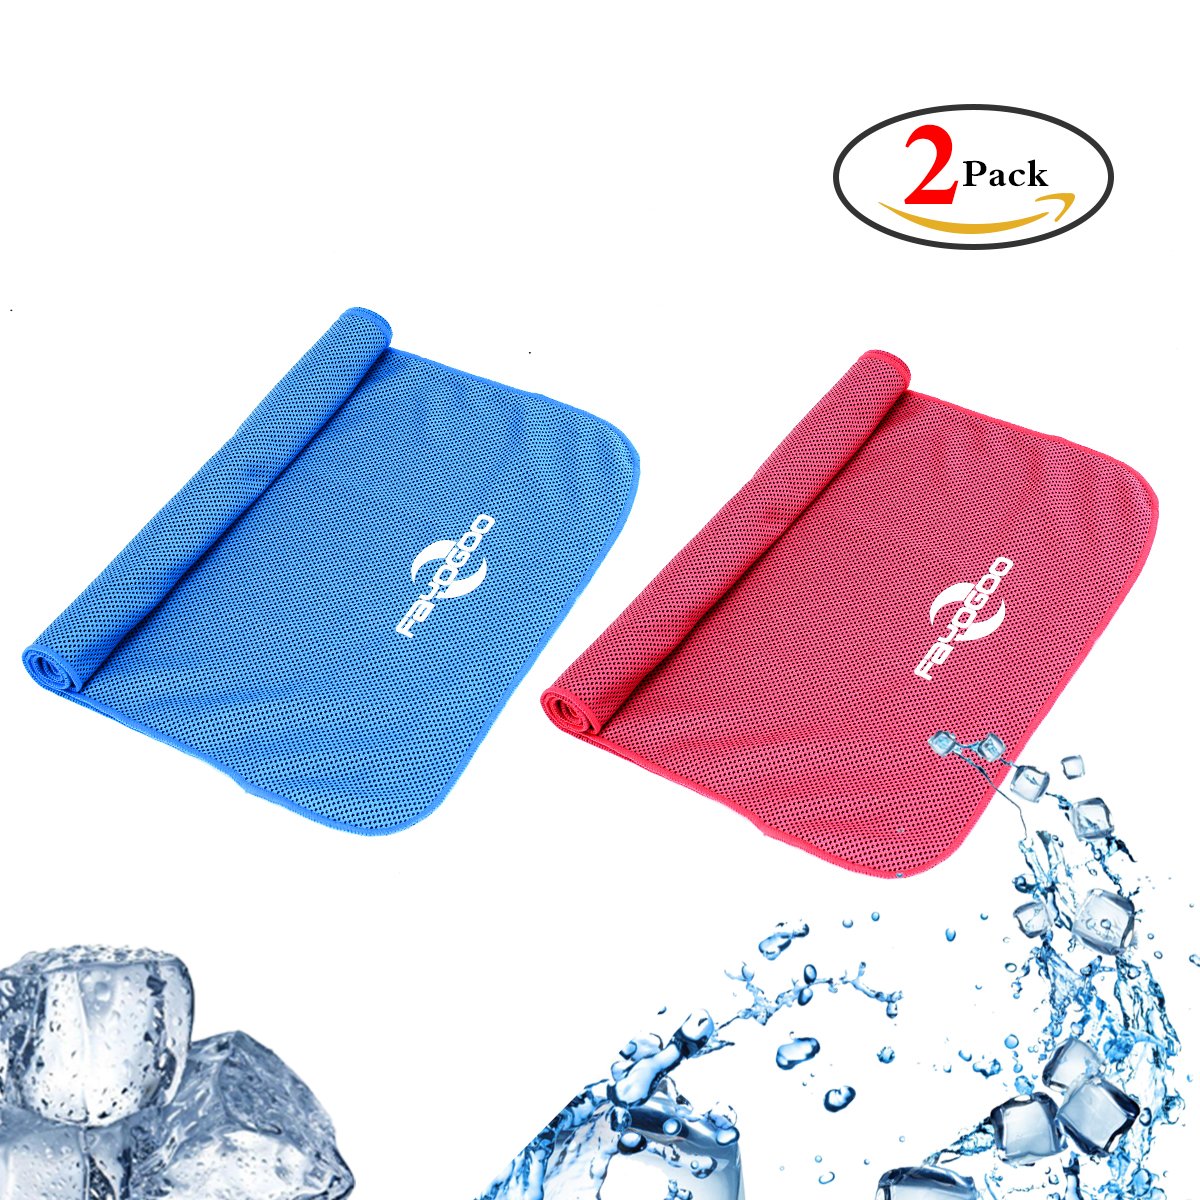 Fayogoo Cooling Towel for Instant Cooling Relief,Microfiber Cool Towel Use as Cooling Bandana,gym towel,35" x12" Ice towel for Sports,Yoga,Fitness,Gym,Travel,Pilates,Workout (Blue+Rose red),2 Pack